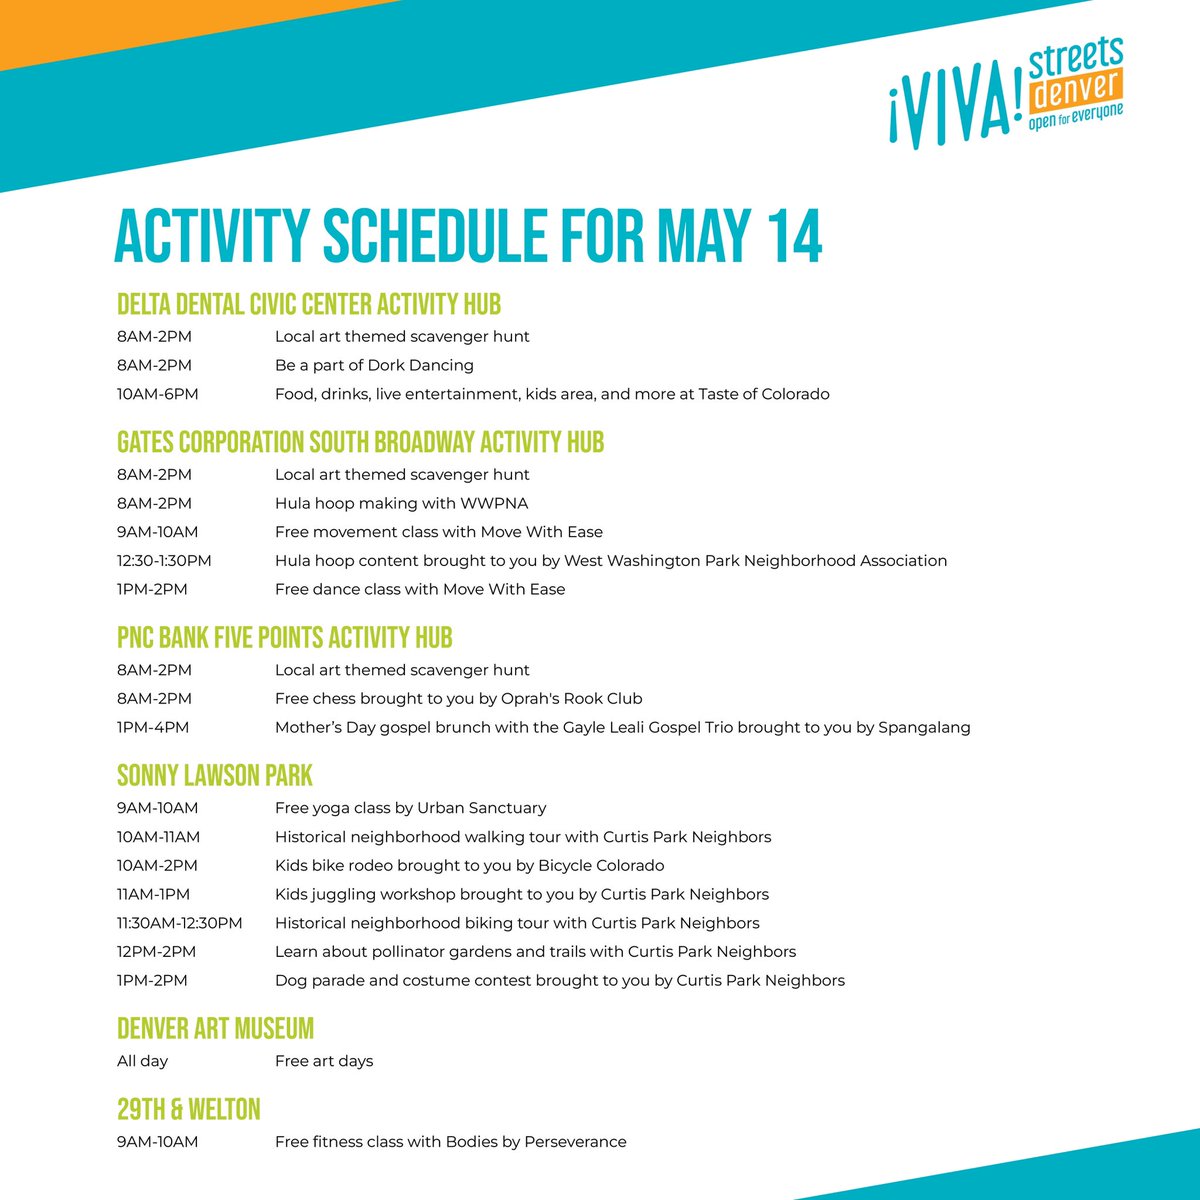 📢 UPDATED ACTIVITY INFO! 📢

There are activities for EVERYONE at ¡Viva! Streets Denver! From restaurants and shops, to parks and neighborhoods, we invite you to explore downtown Denver in an exciting, new way! 

#vivastreetsdenver #denver #ciclovia #denverevents